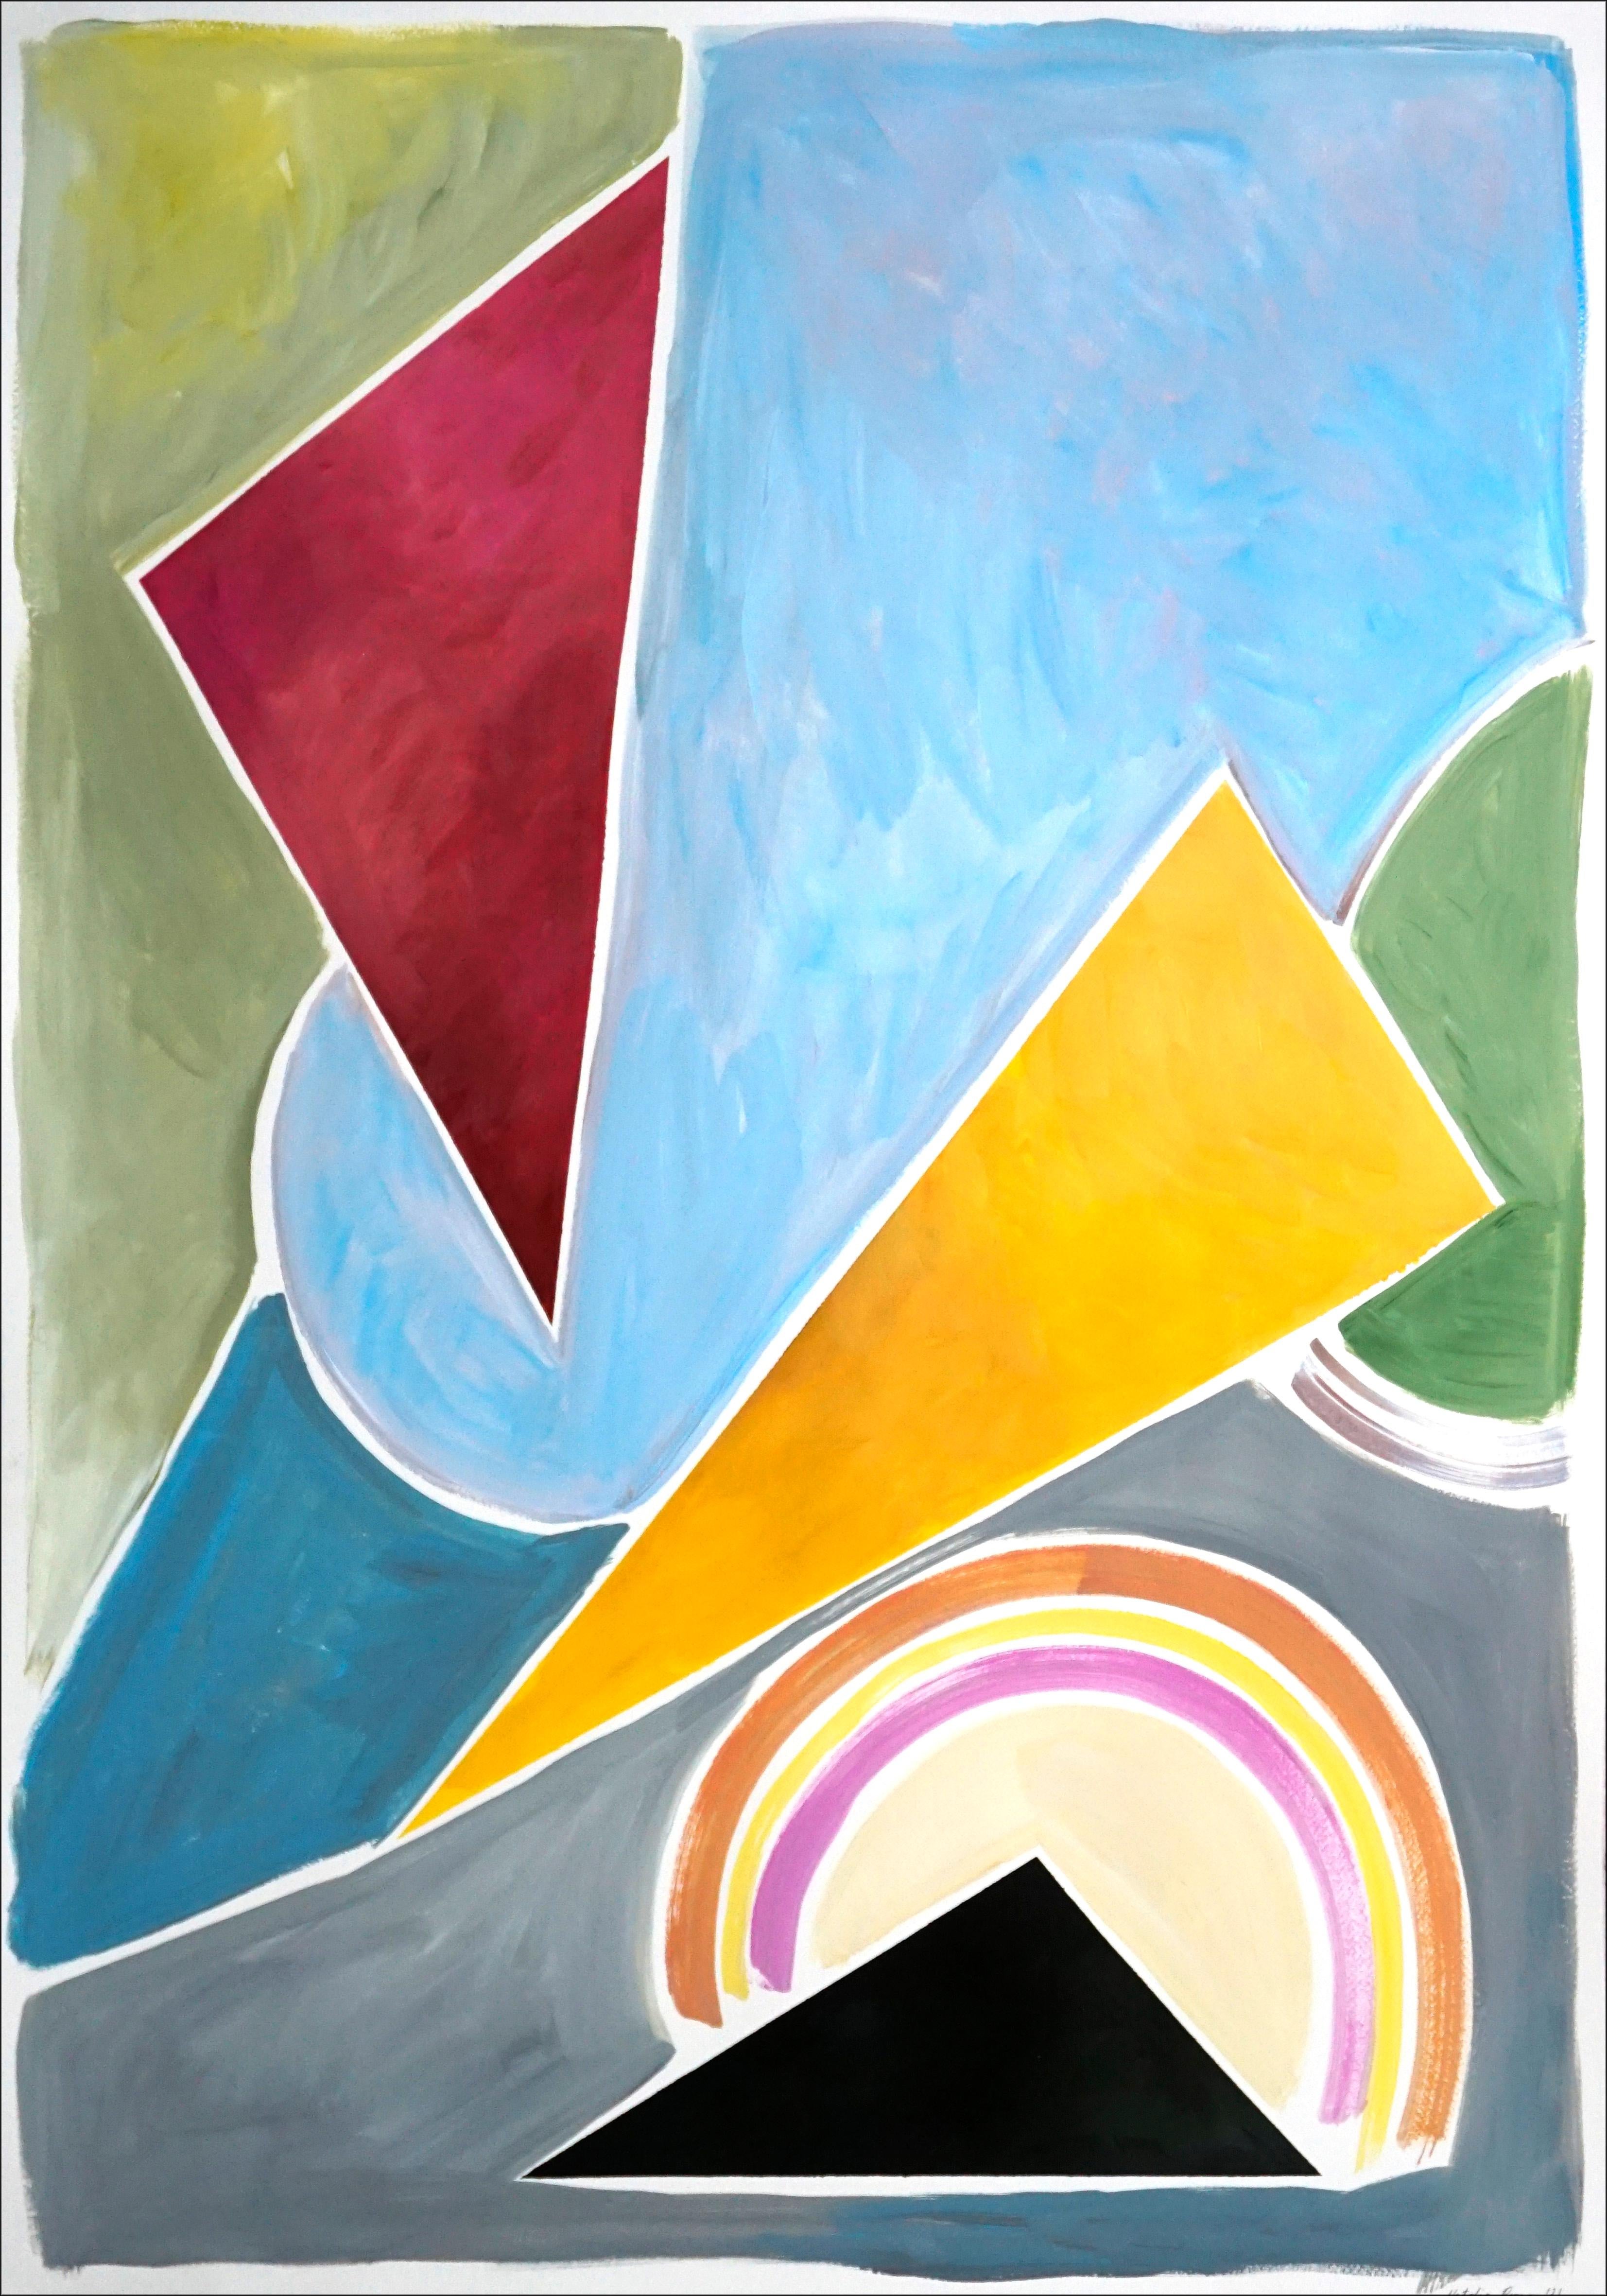 Natalia Roman Abstract Painting - Constructivist Triangles in Primary Tones, Abstract Geometric Shapes Red, Yellow